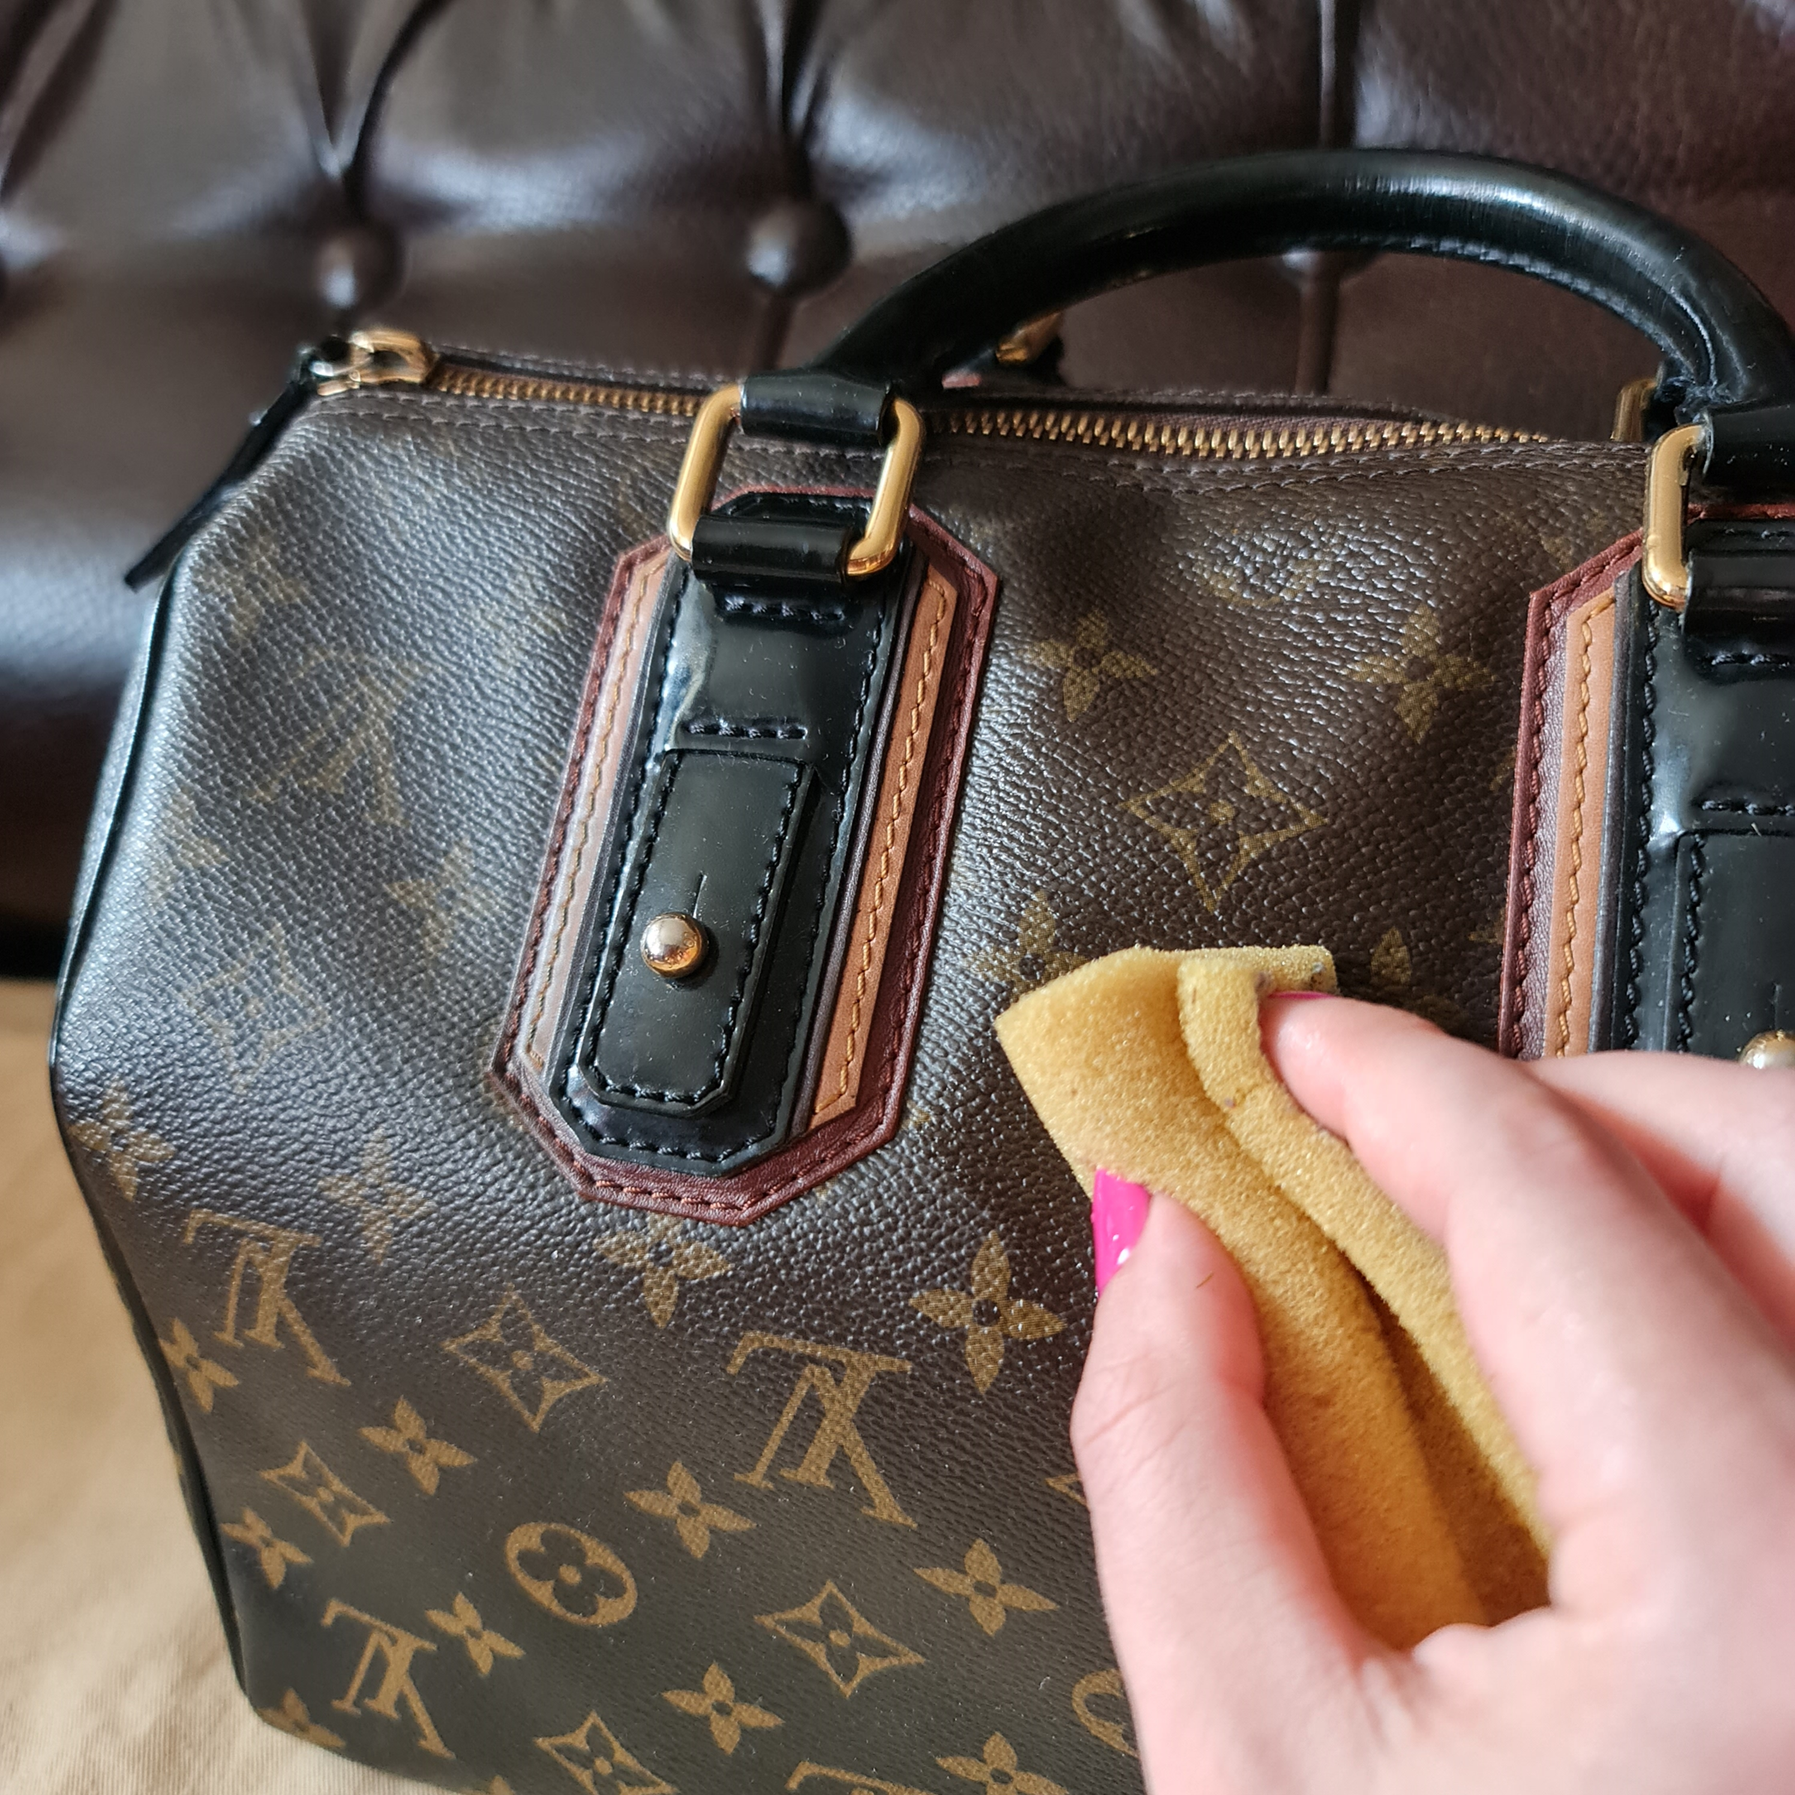 3 Reasons You Should Keep your Louis Vuitton in a Dust Bag - Cleaning